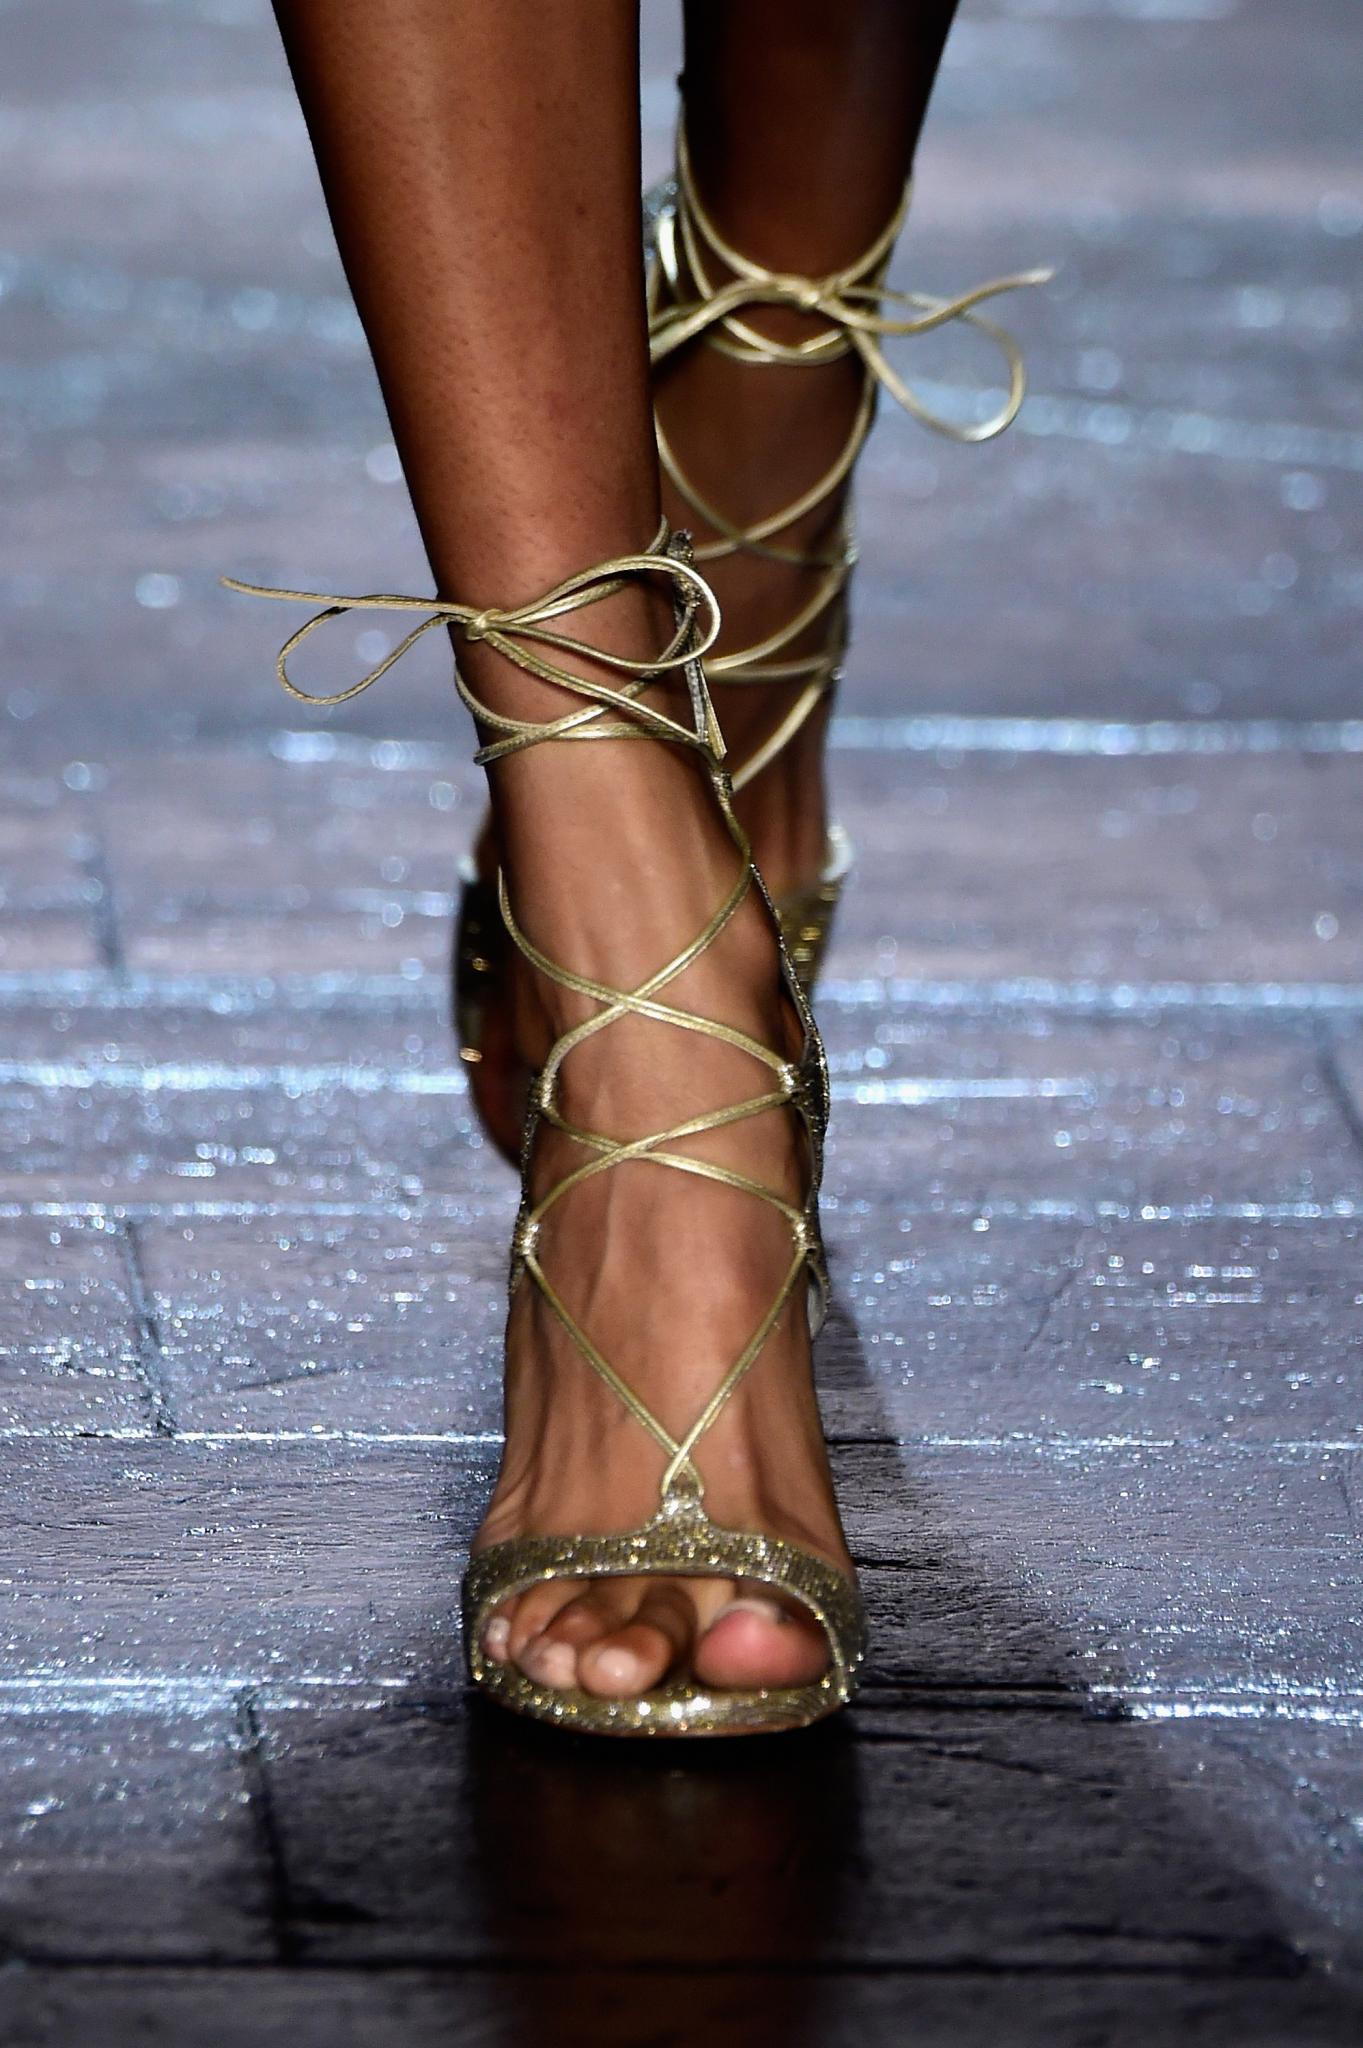 Started From The Bottom: The Ultimate Runway Shoes
